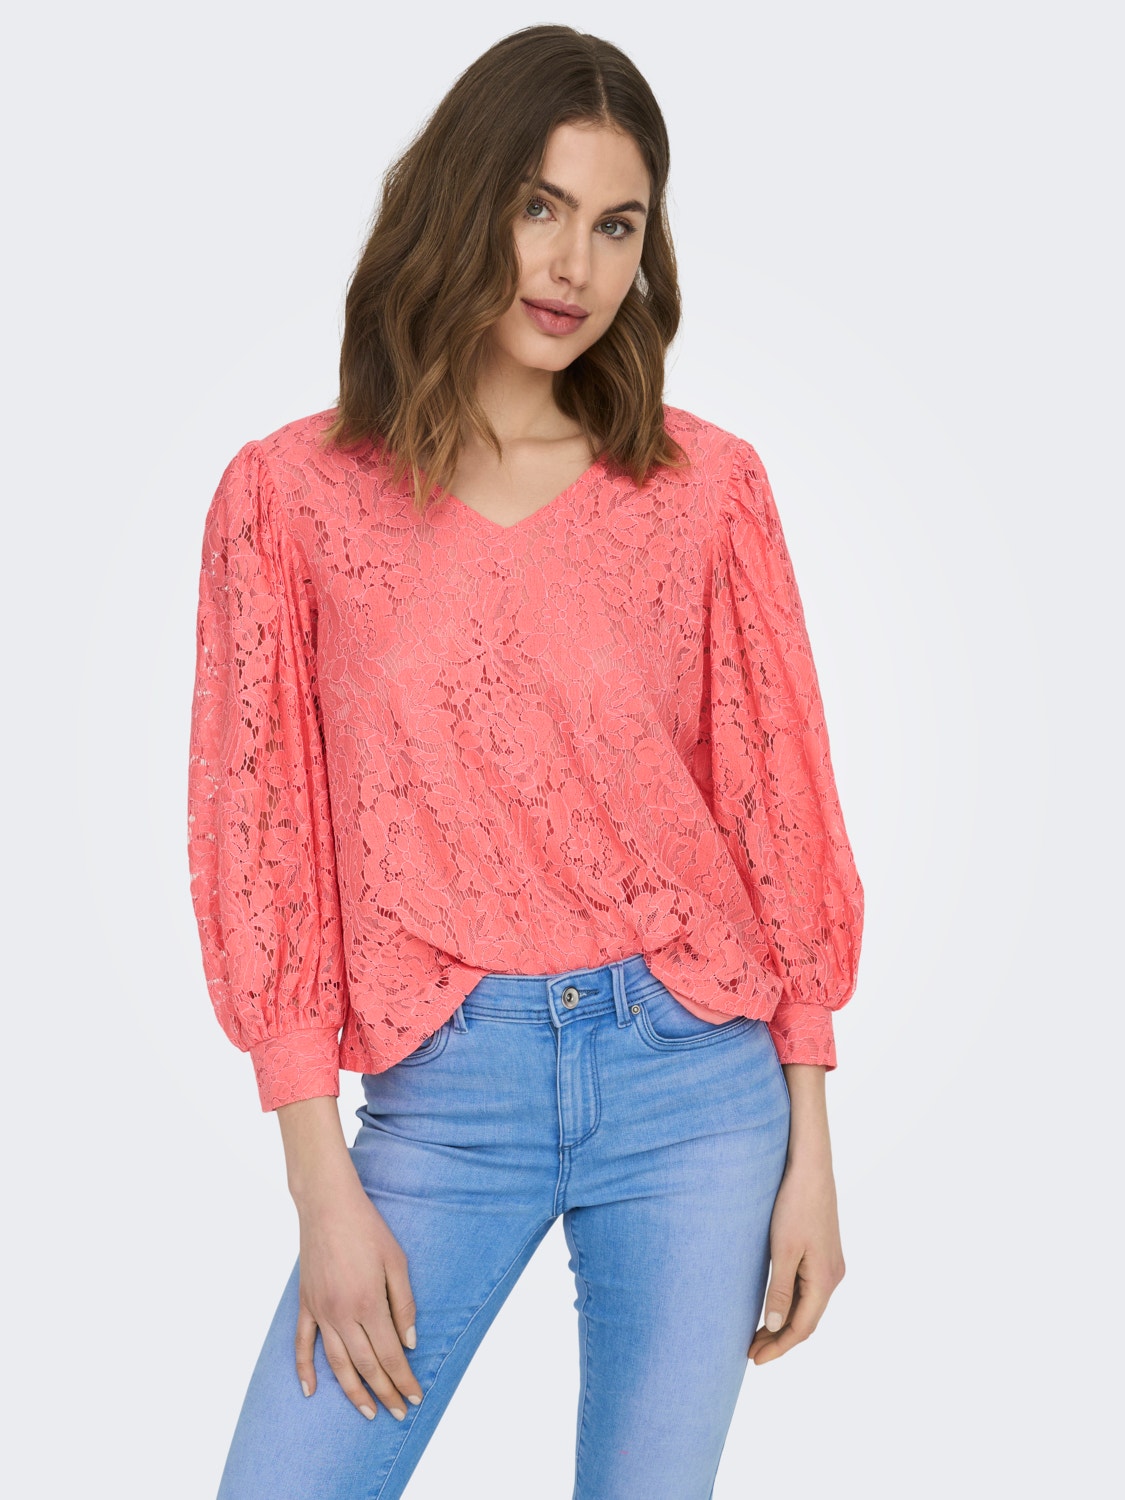 ONLY Regular Fit V-Neck Volume sleeves Top -Georgia Peach - 15284299